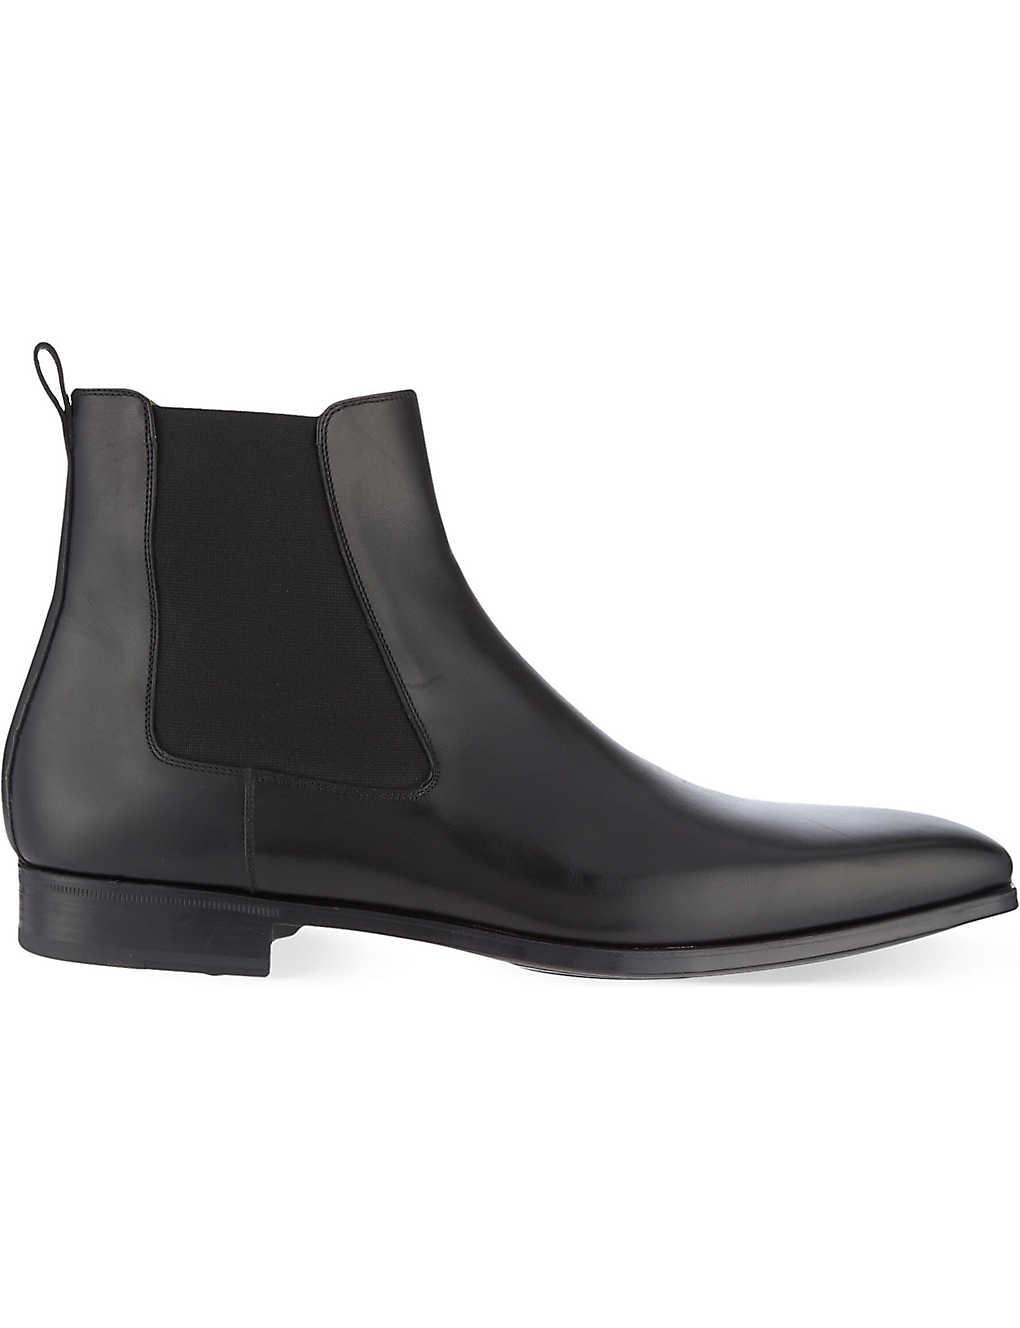 Magnanni Leather Chelsea Boots in Black for Men - Save 39% - Lyst